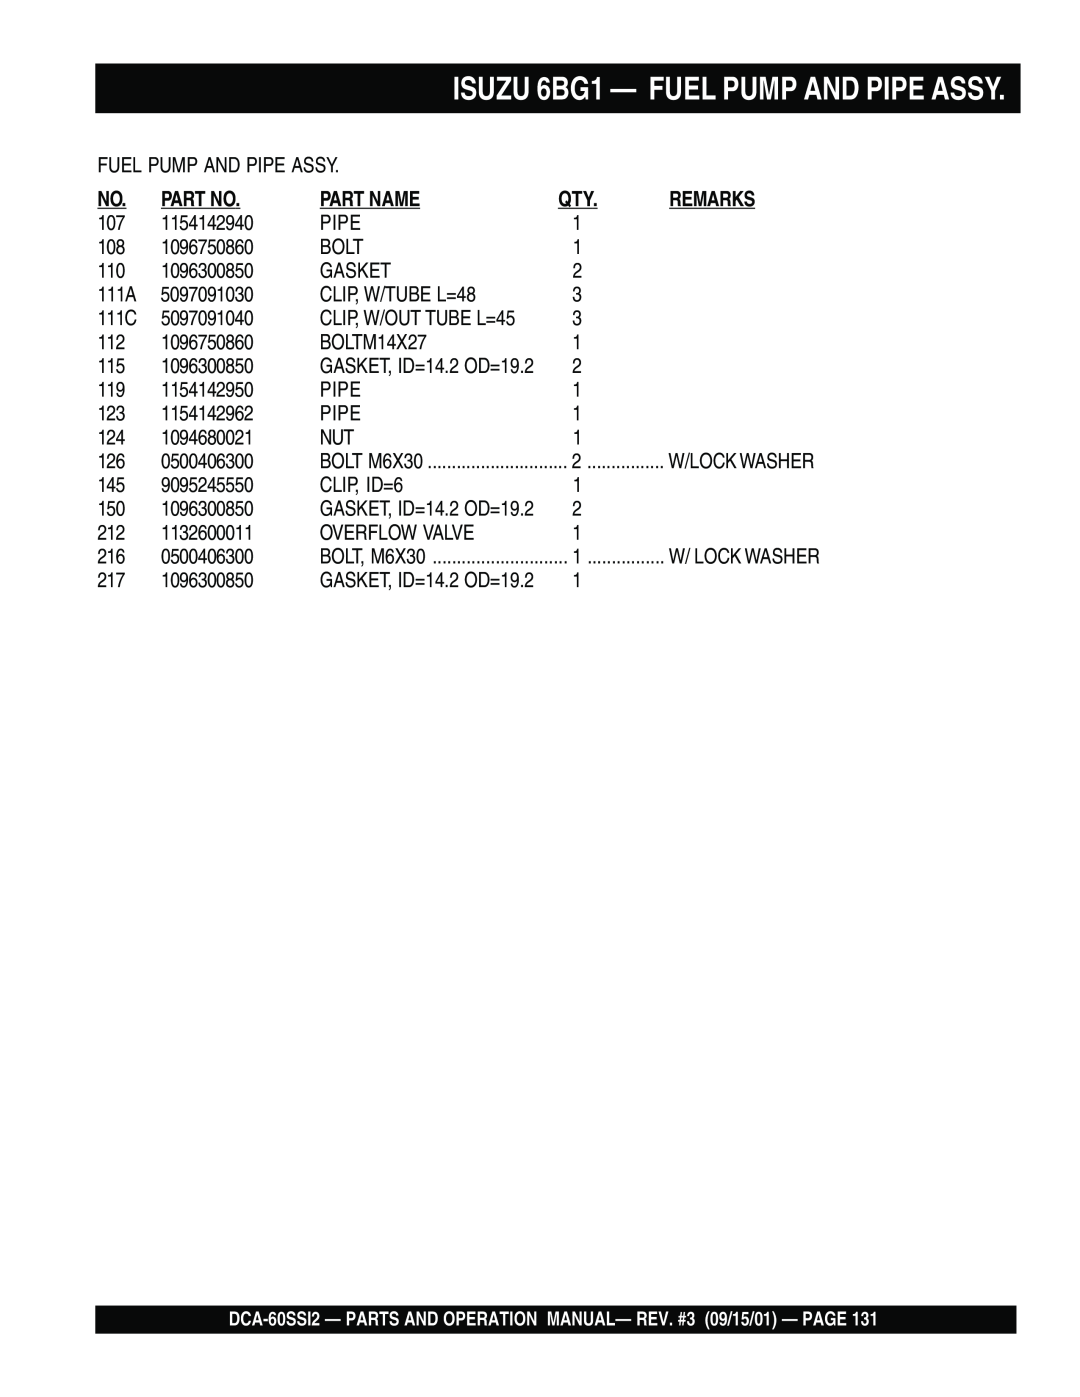 Multiquip DCA-60SS12 operation manual ISUZU 6BG1 — FUEL PUMP AND PIPE ASSY, Part No, Part Name, Remarks 